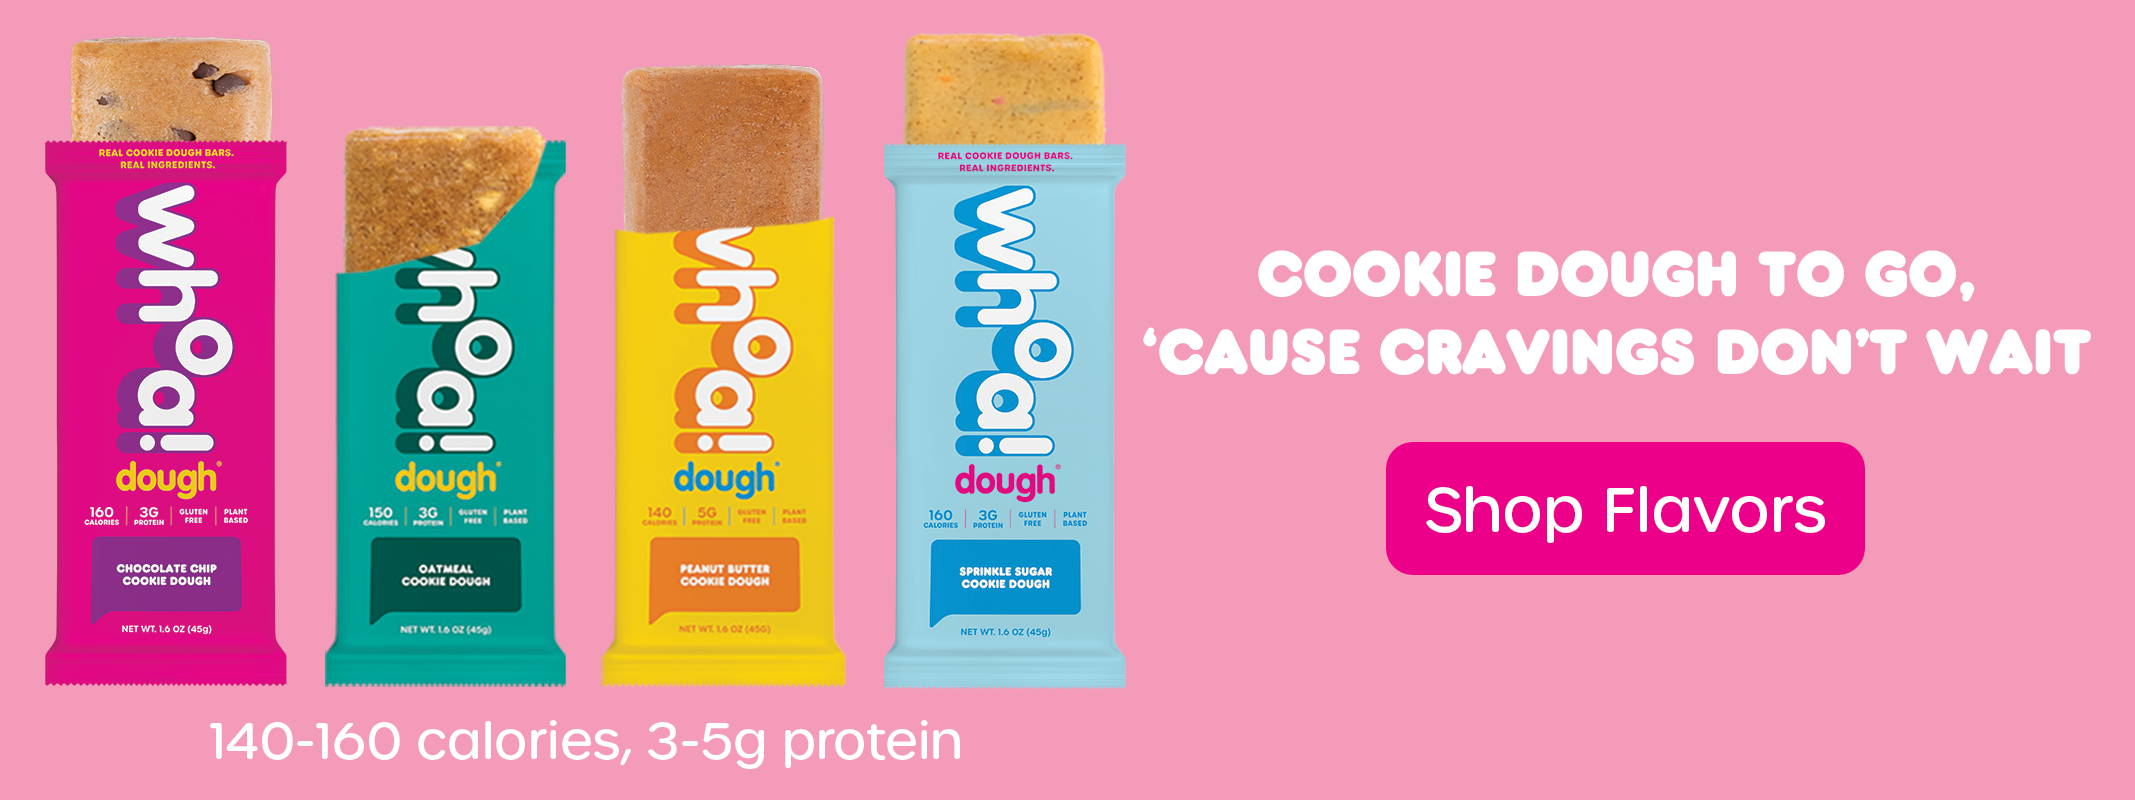 American Airlines to offer Woah Dough cookie bars on domestic